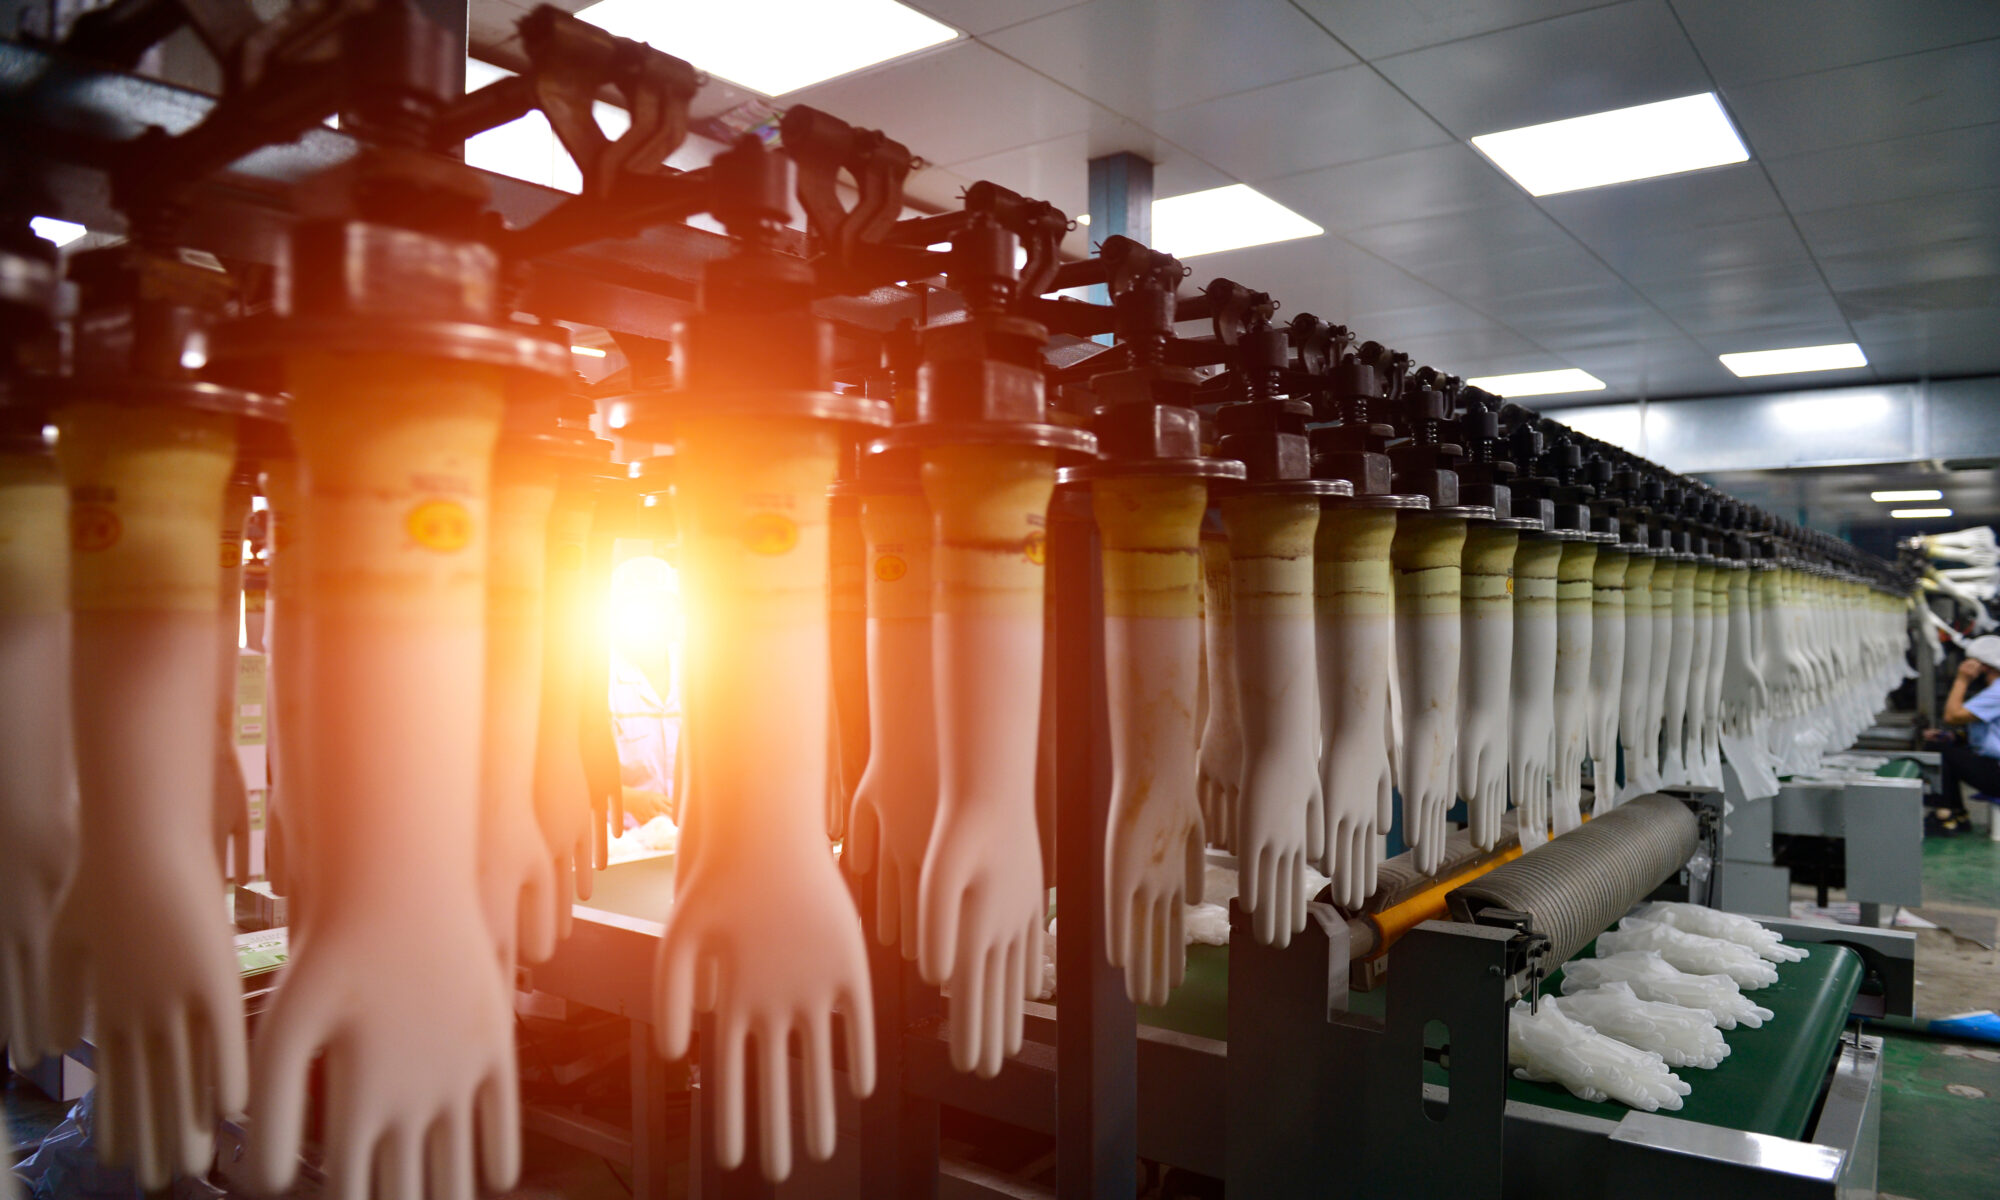 Glove formers hang on the factory production line.